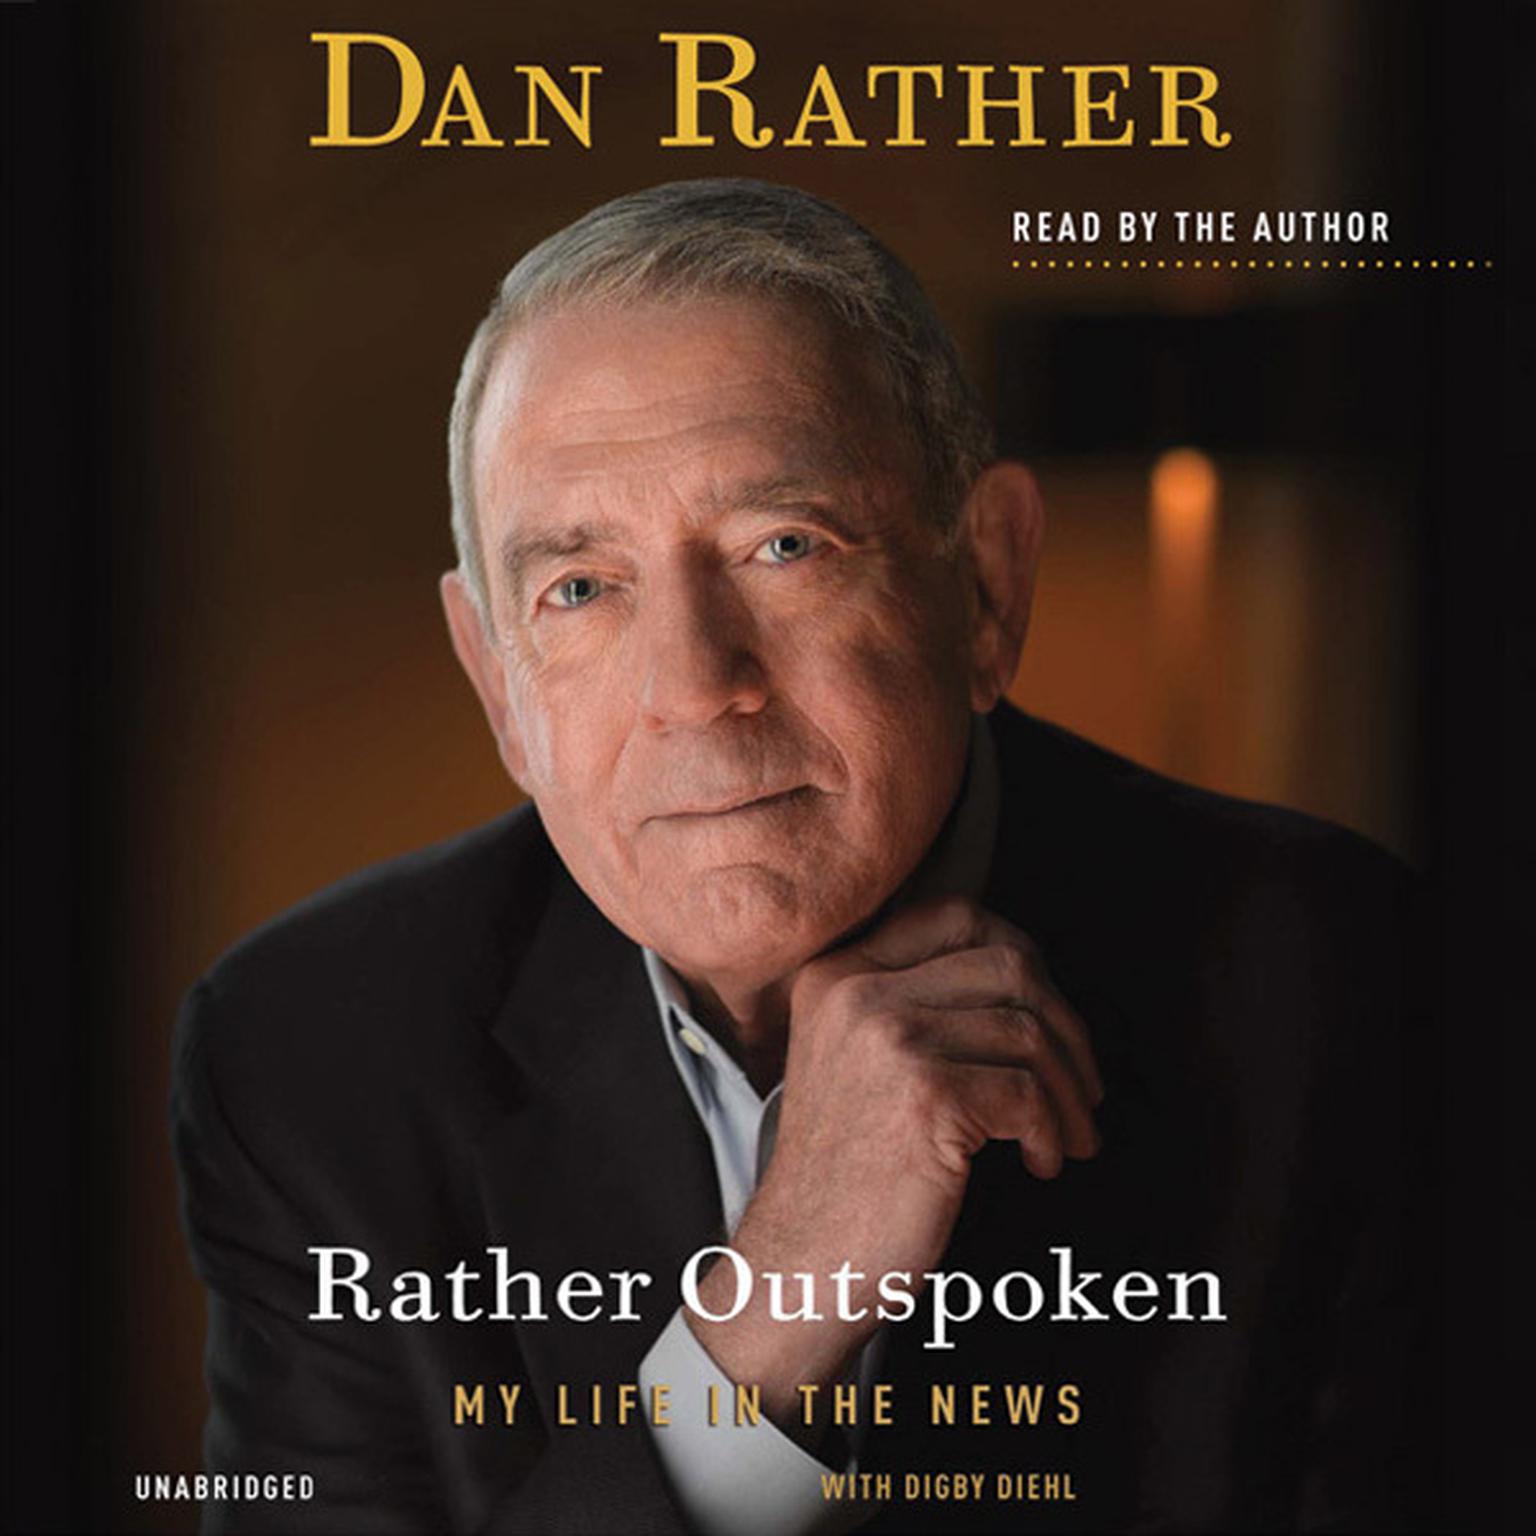 Rather Outspoken: My Life in the News Audiobook, by Dan Rather